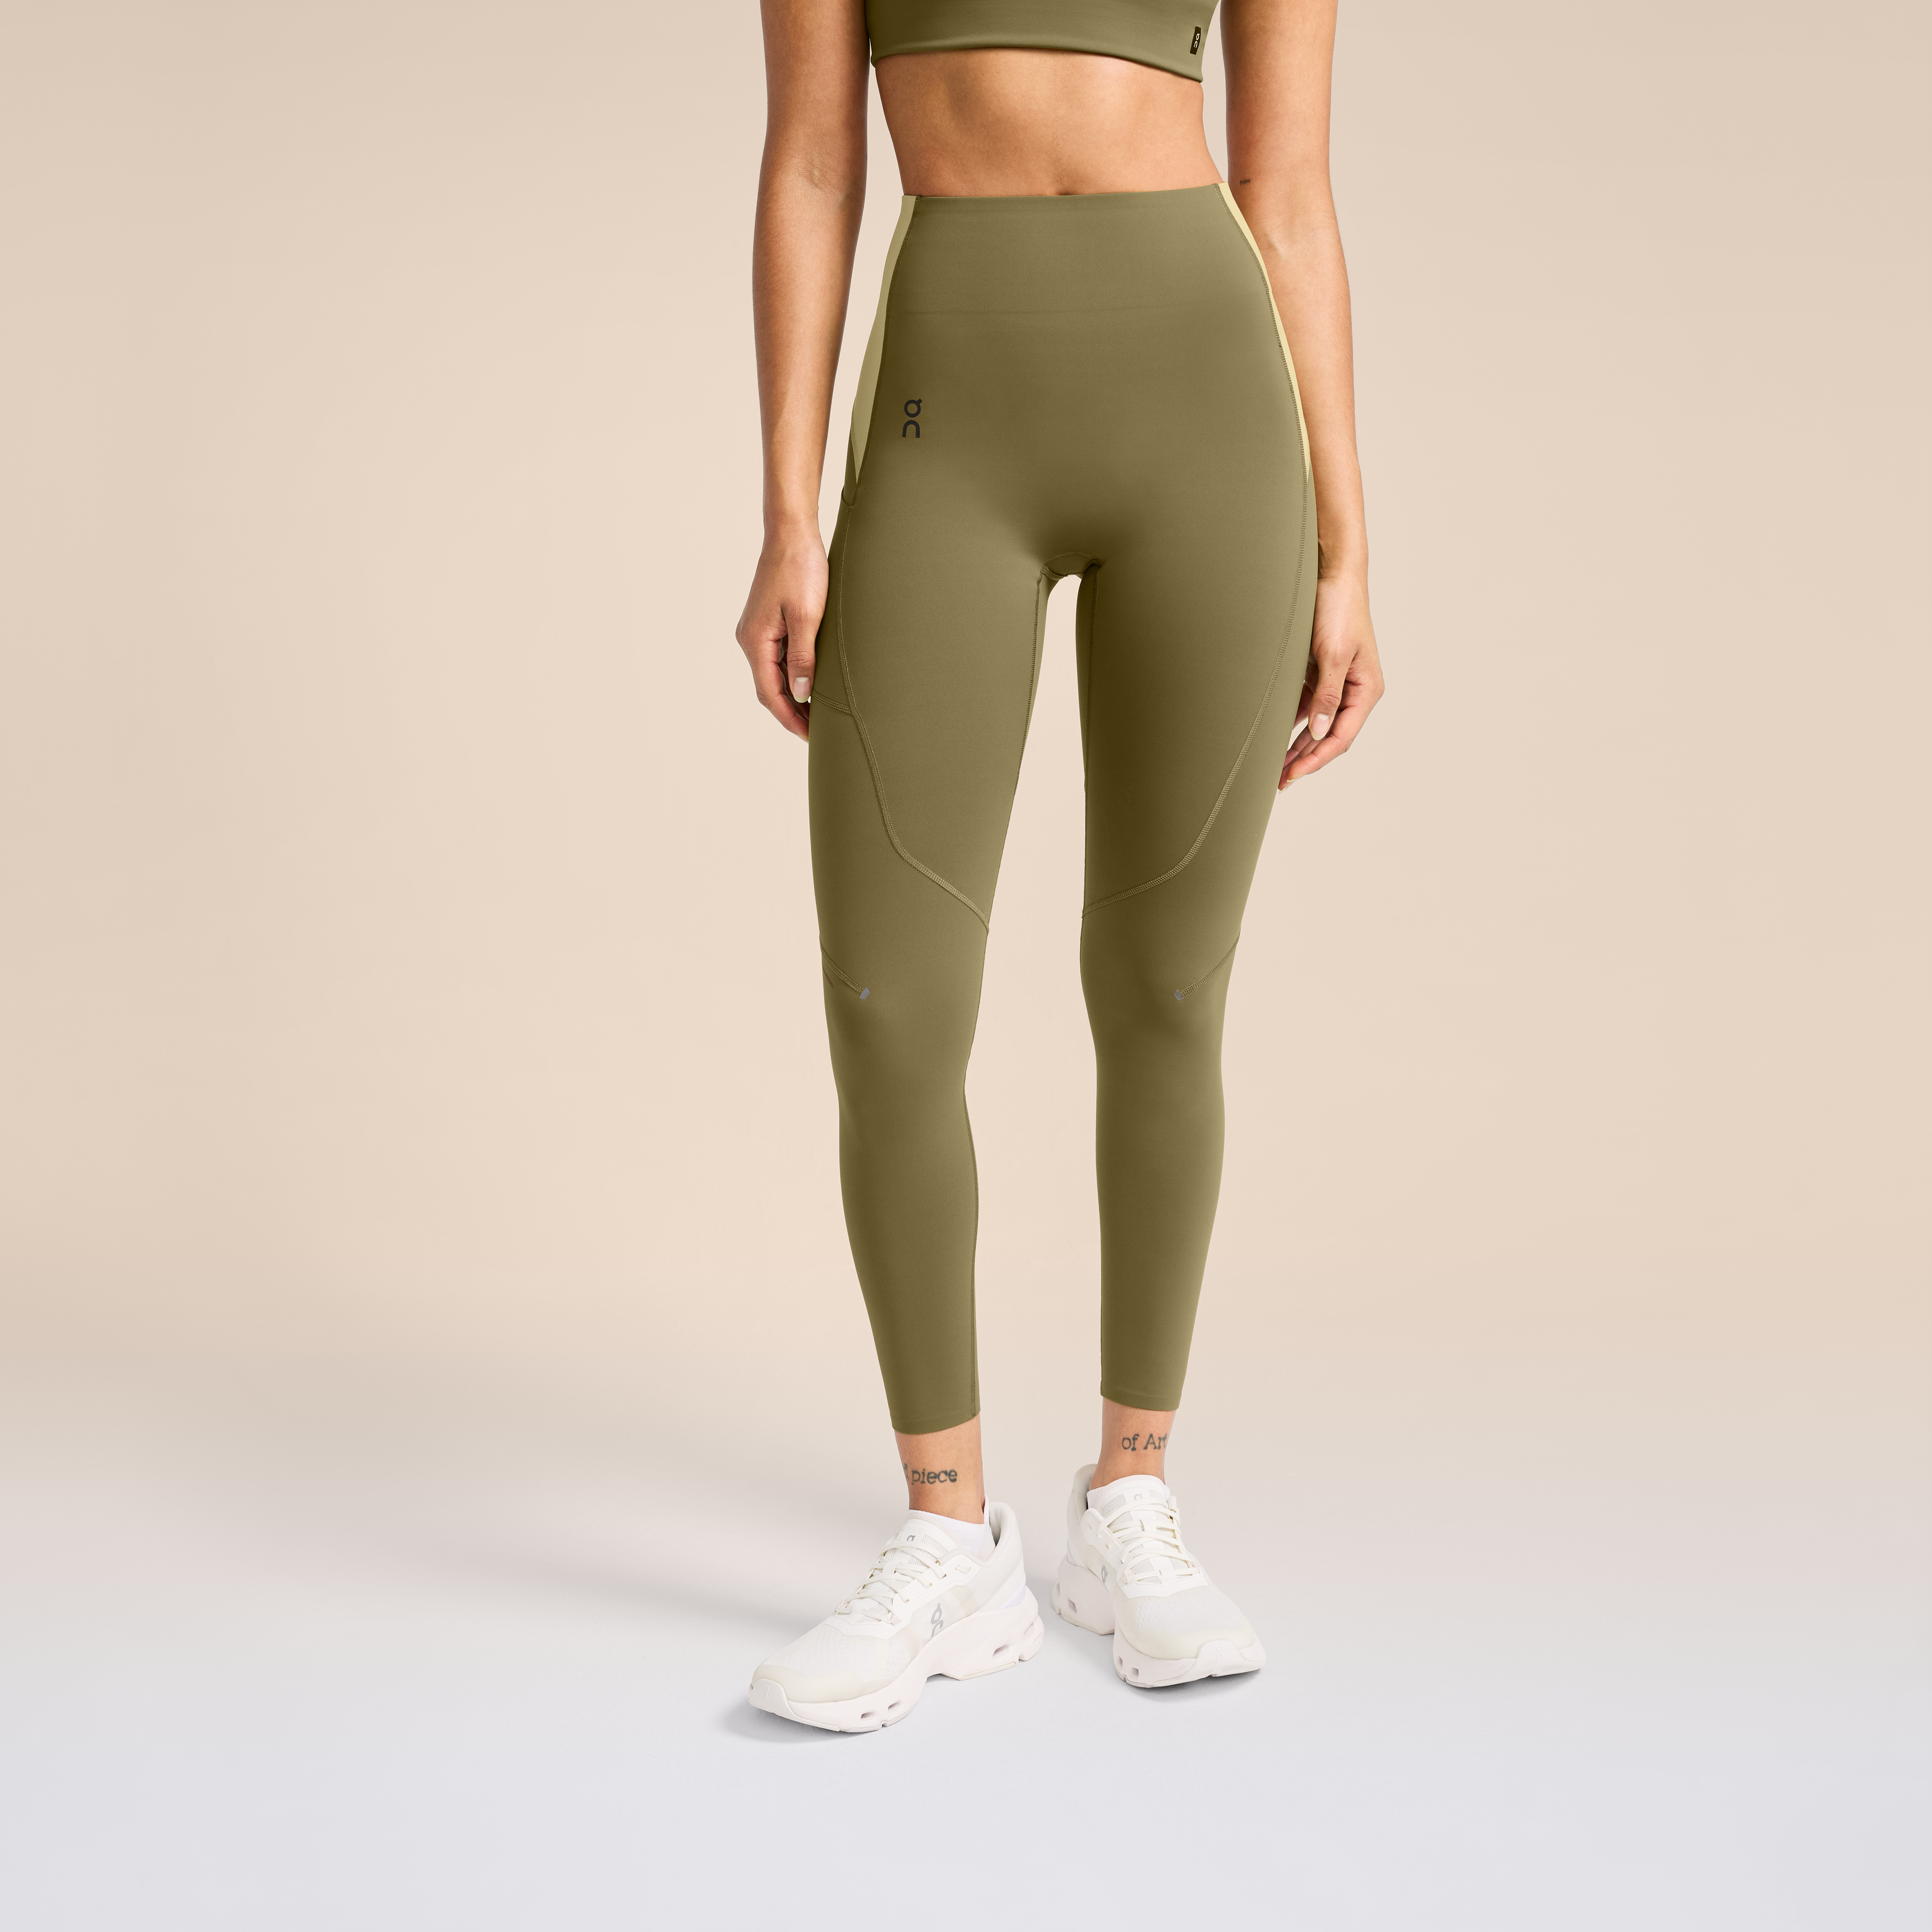 On Movement Tights Long Green Women All-day, yoga, low-intensity workouts, ultra-soft. Tights